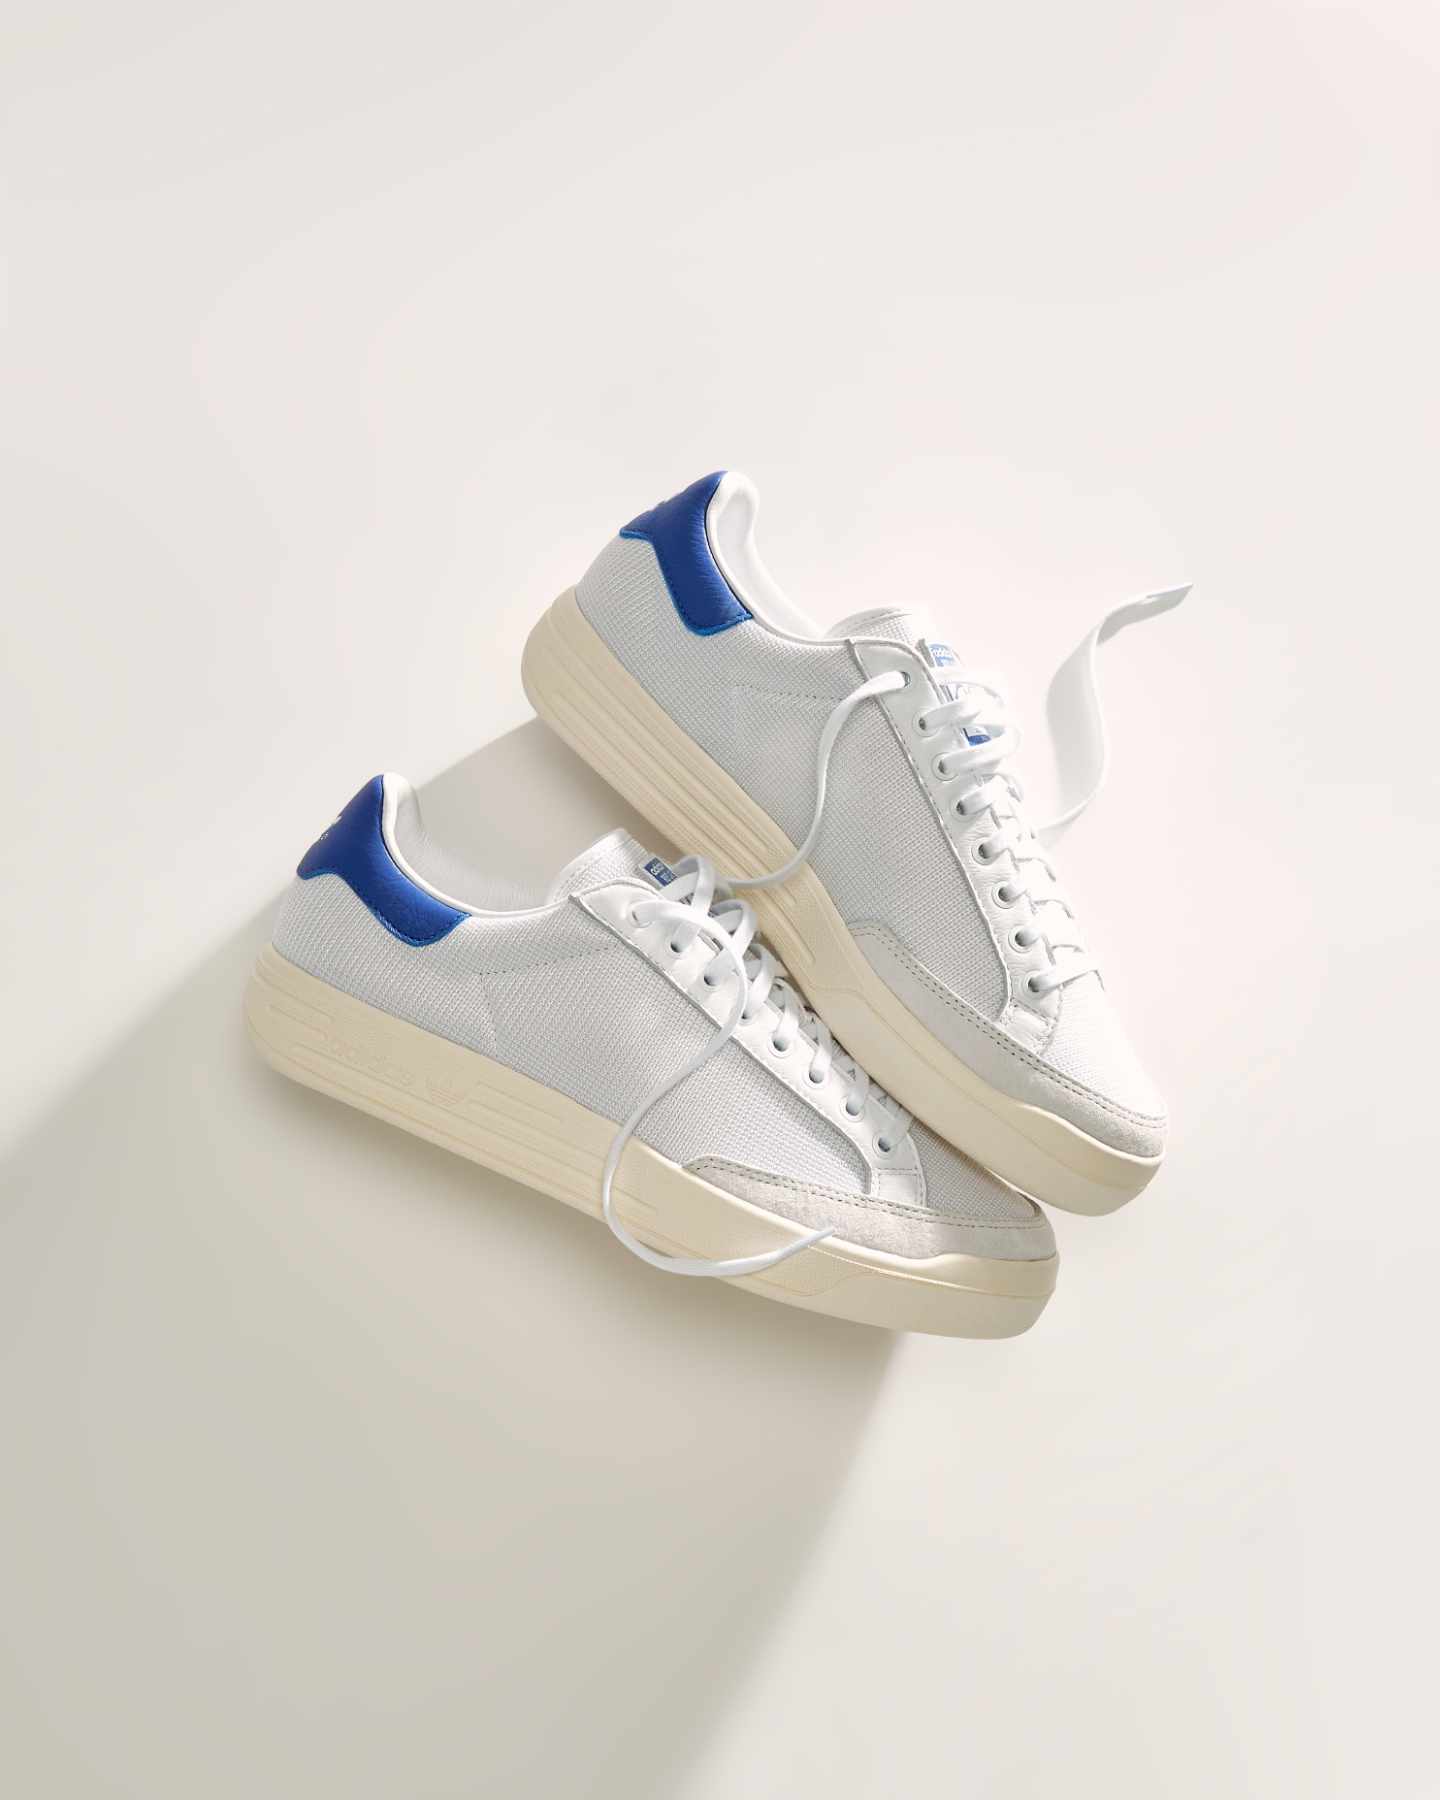 KITH & adidas' Rod Laver Fall 2023 collaboration has a drop date